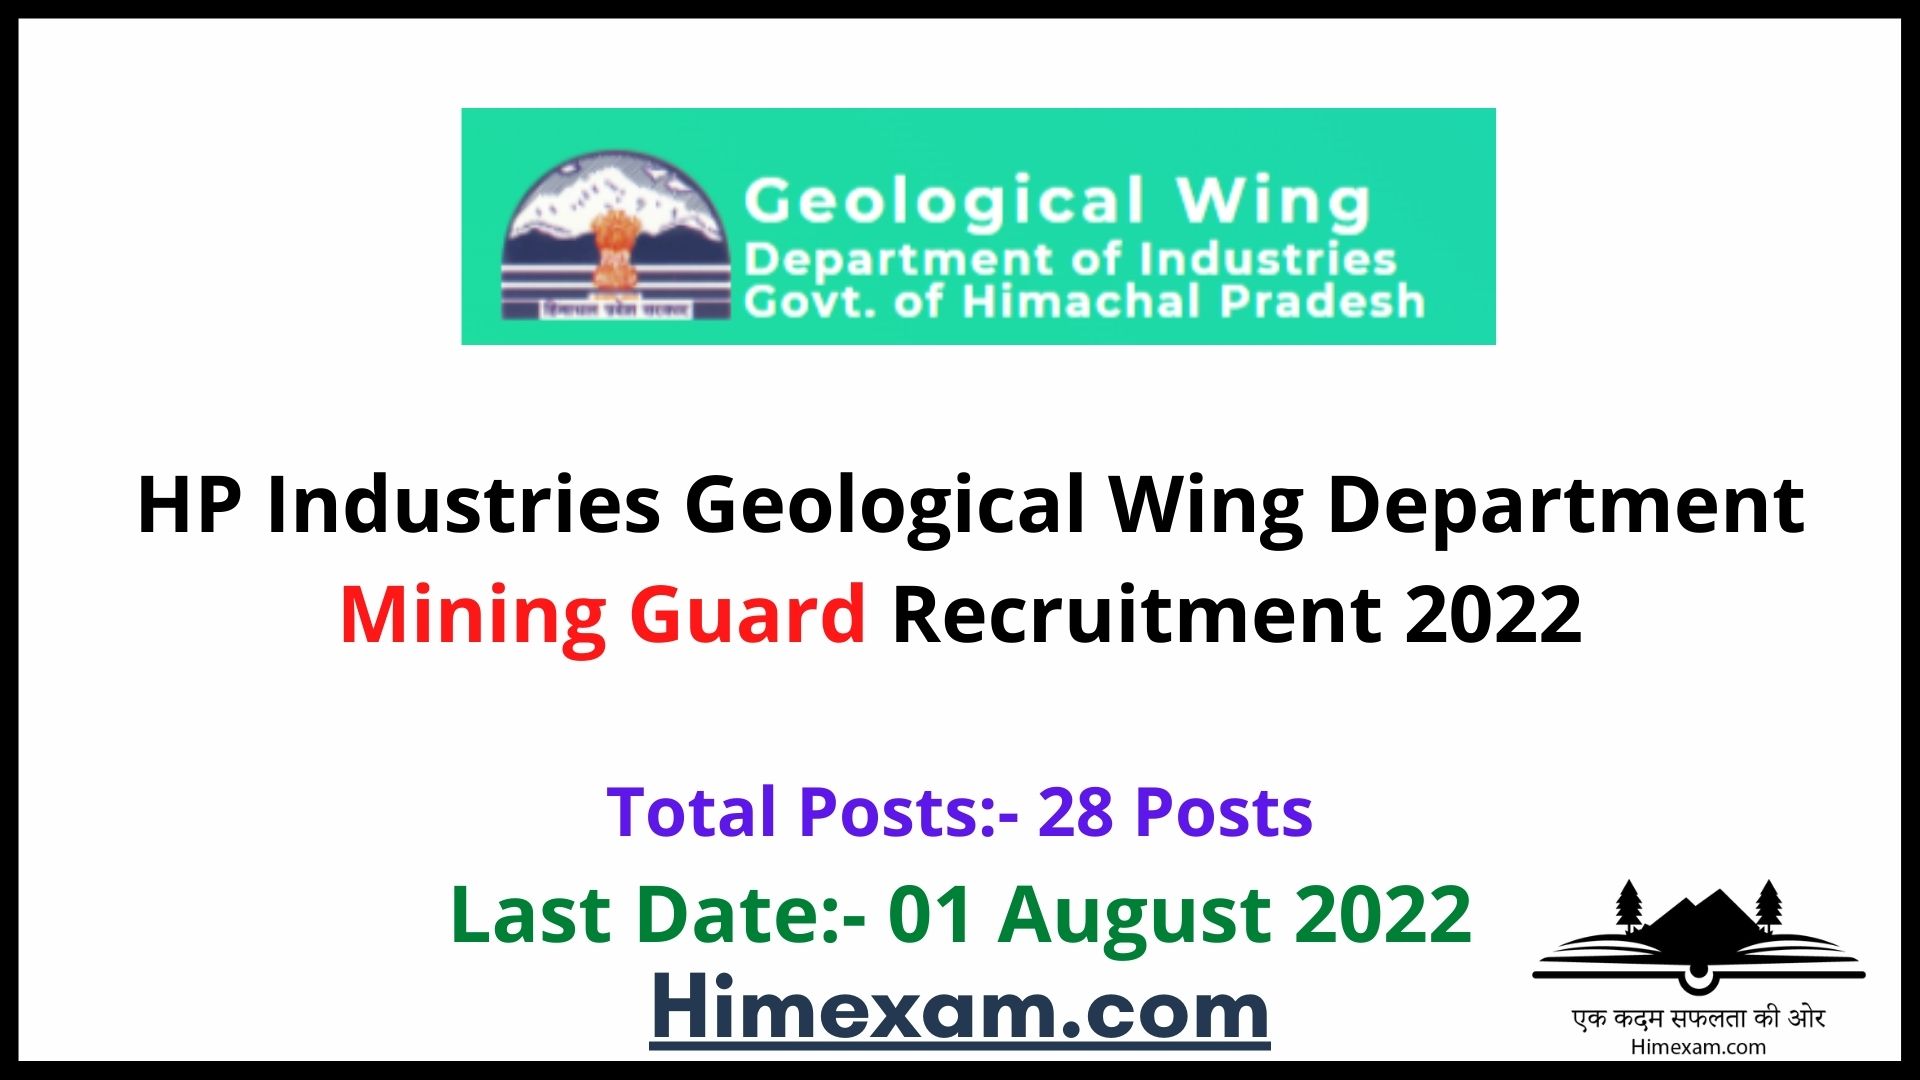 HP Industries Geological Wing Department Mining Guard Recruitment 2022